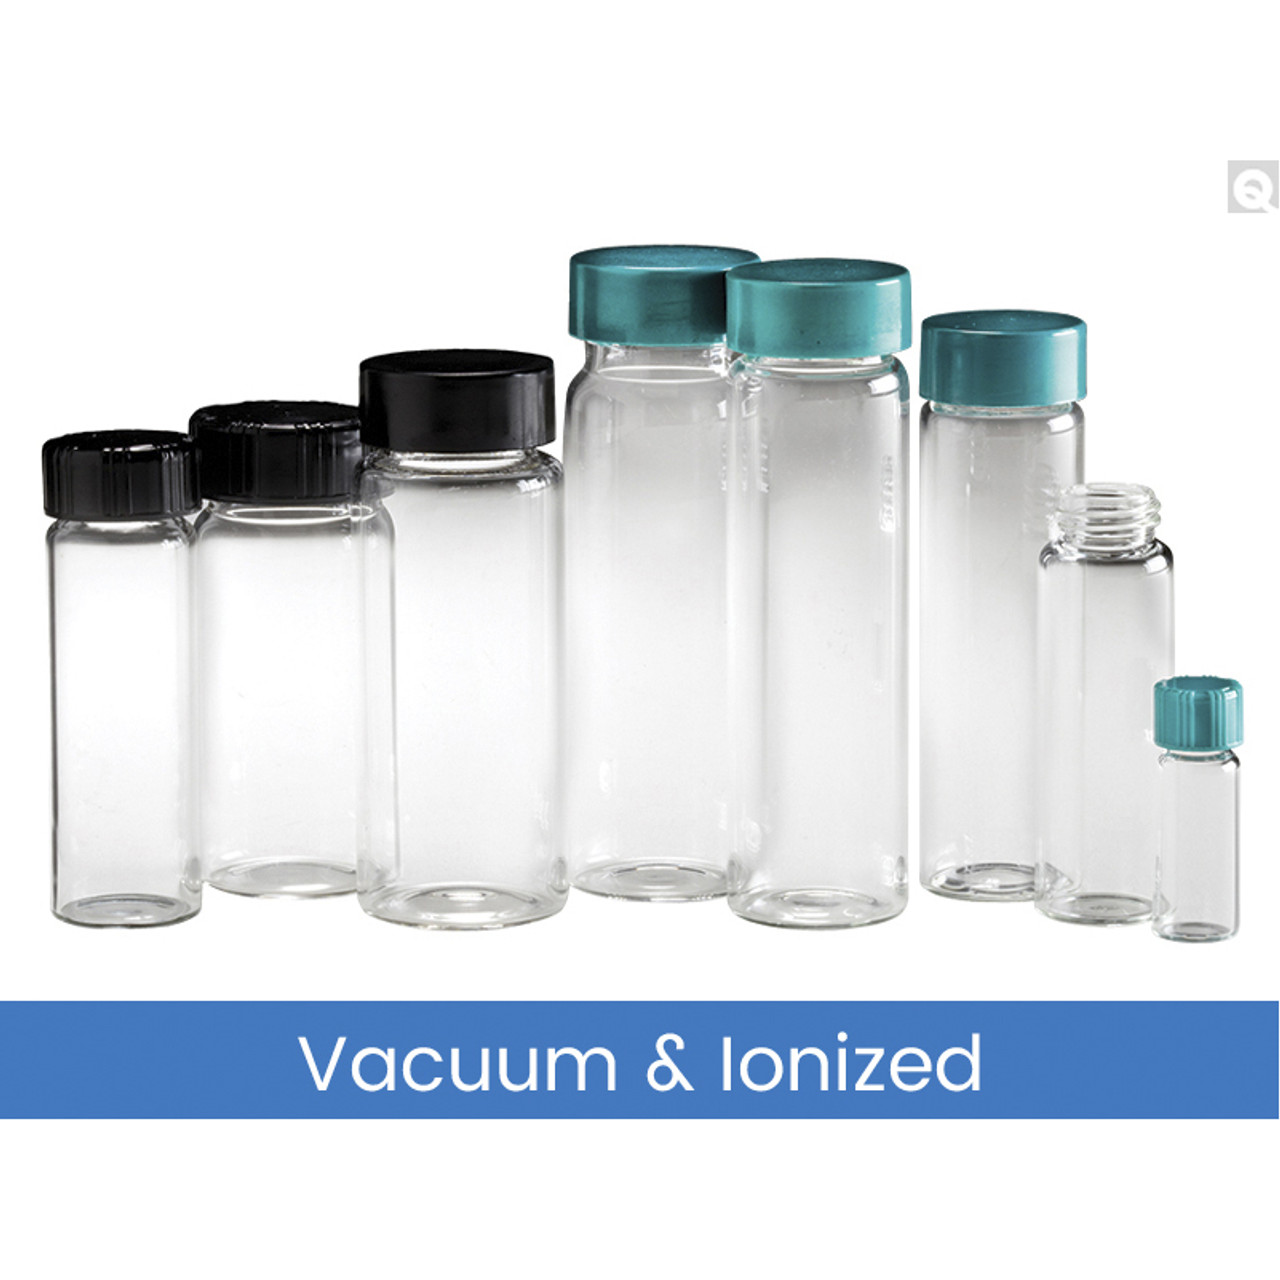 https://cdn11.bigcommerce.com/s-3yvzqa/images/stencil/1280x1280/products/34032/58696/Vials_Vacuum_and_Ionized_Glass_Sample_Clear__06003.1552510779.jpg?c=2